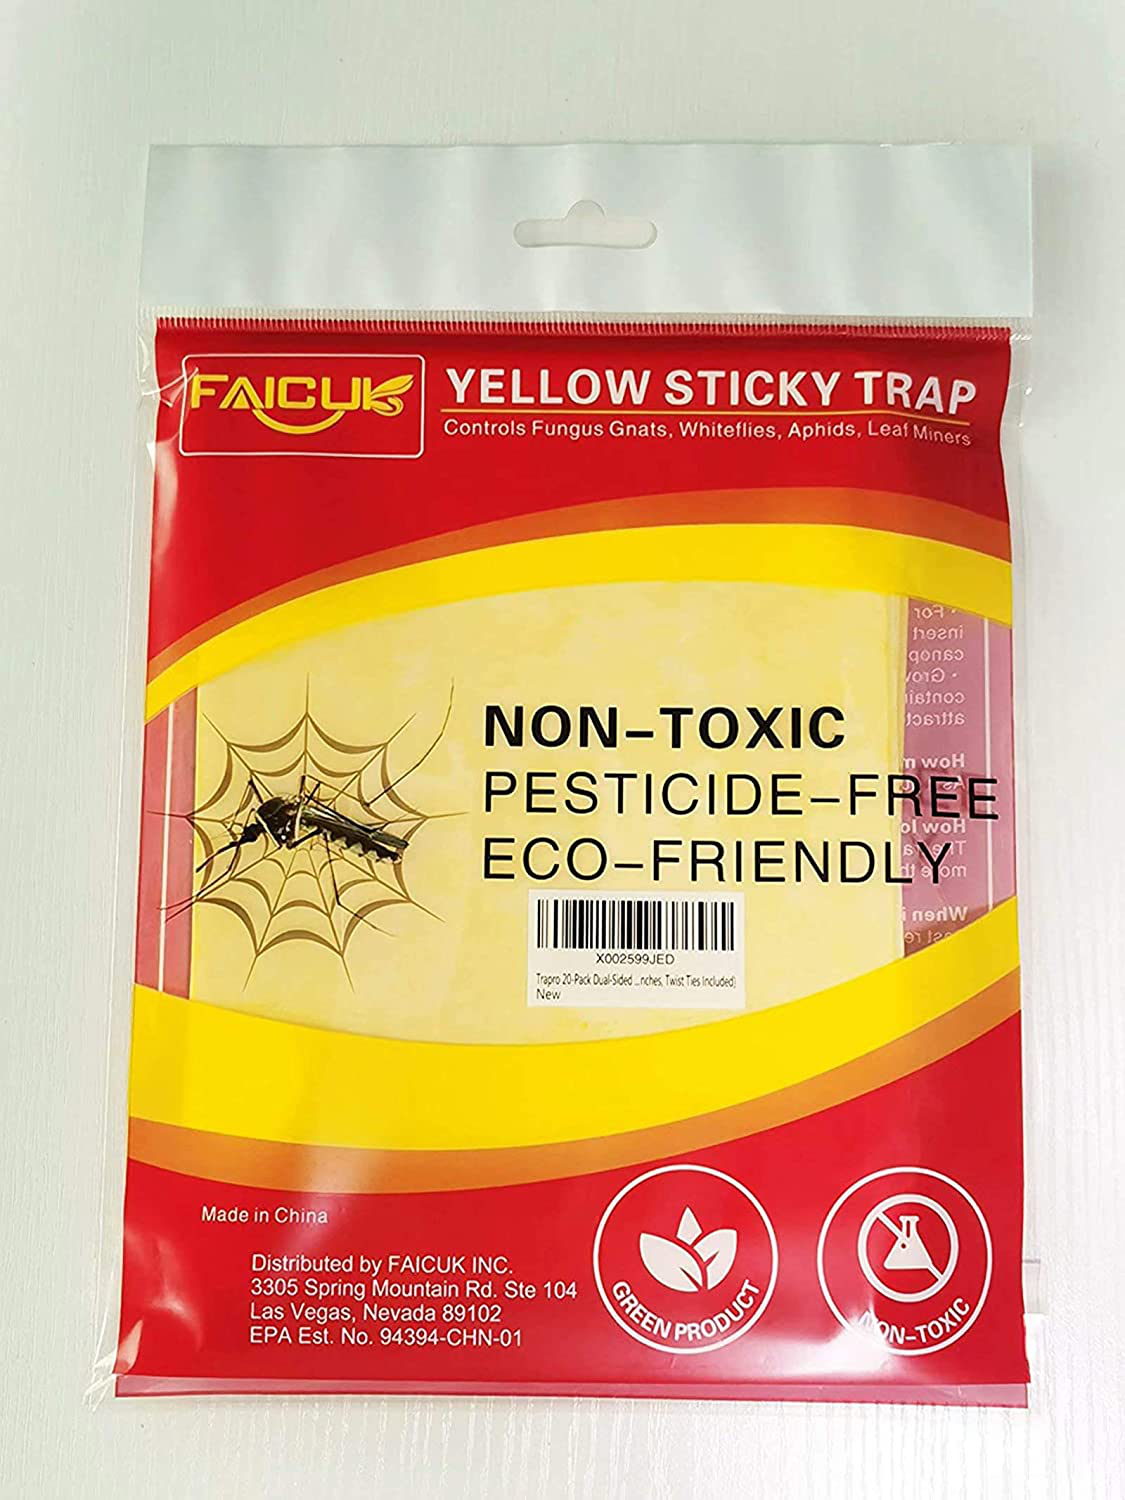 20 Pack Dual-Sided Yellow Sticky Traps for Flying Plant Insect Like Fungus Gnats, Aphids, Whiteflies, Leafminers